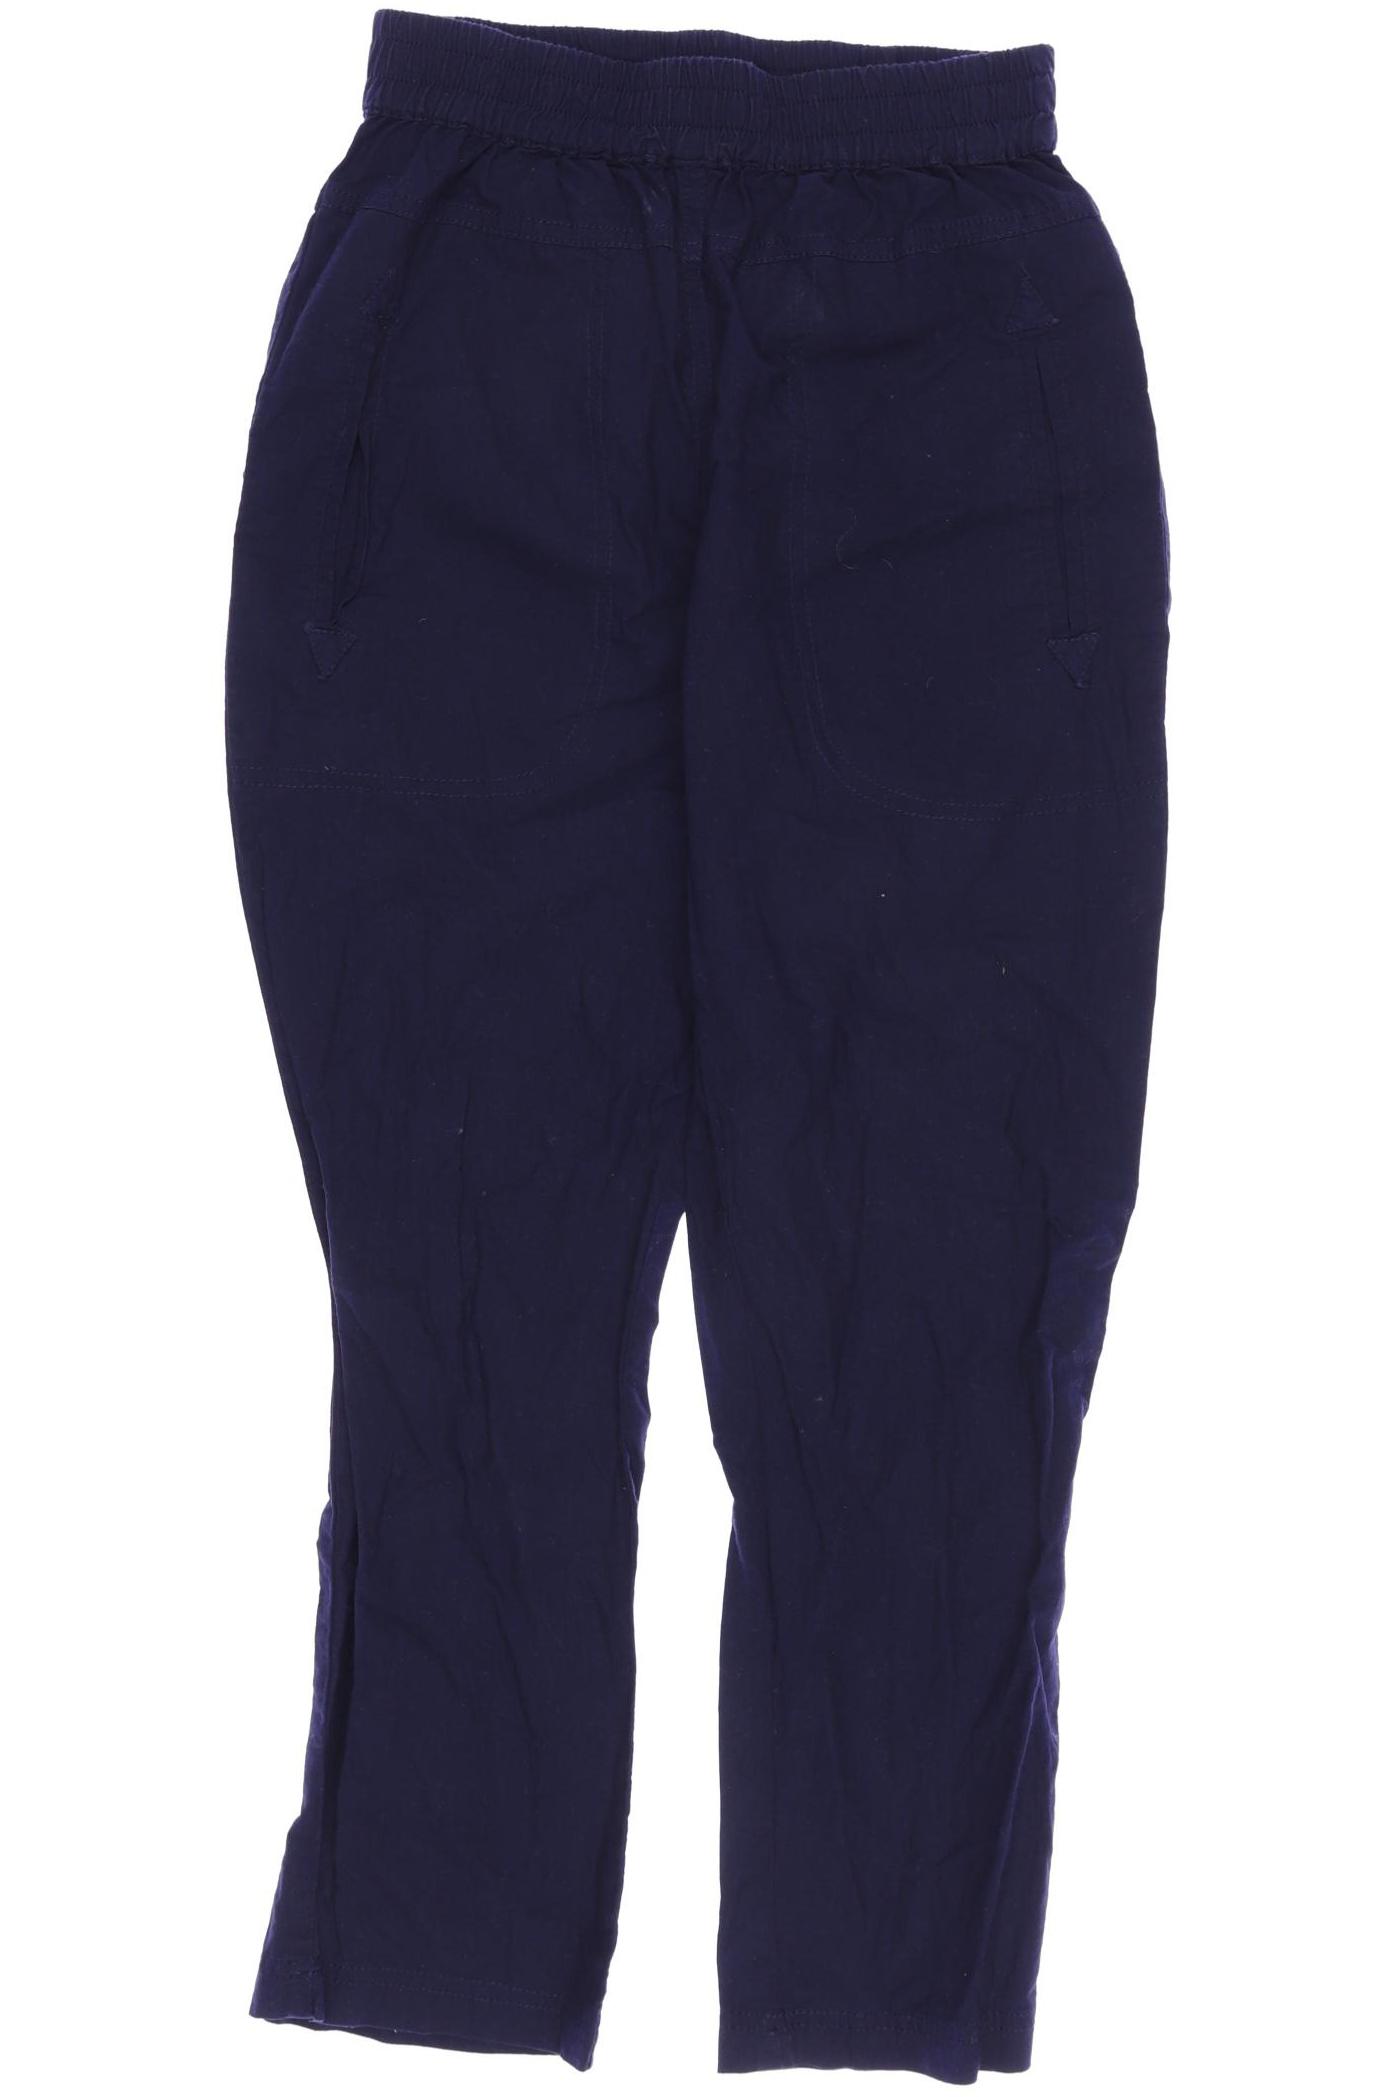 Freds World by Green Cotton Jungen Stoffhose, marineblau von Fred's World by Green Cotton